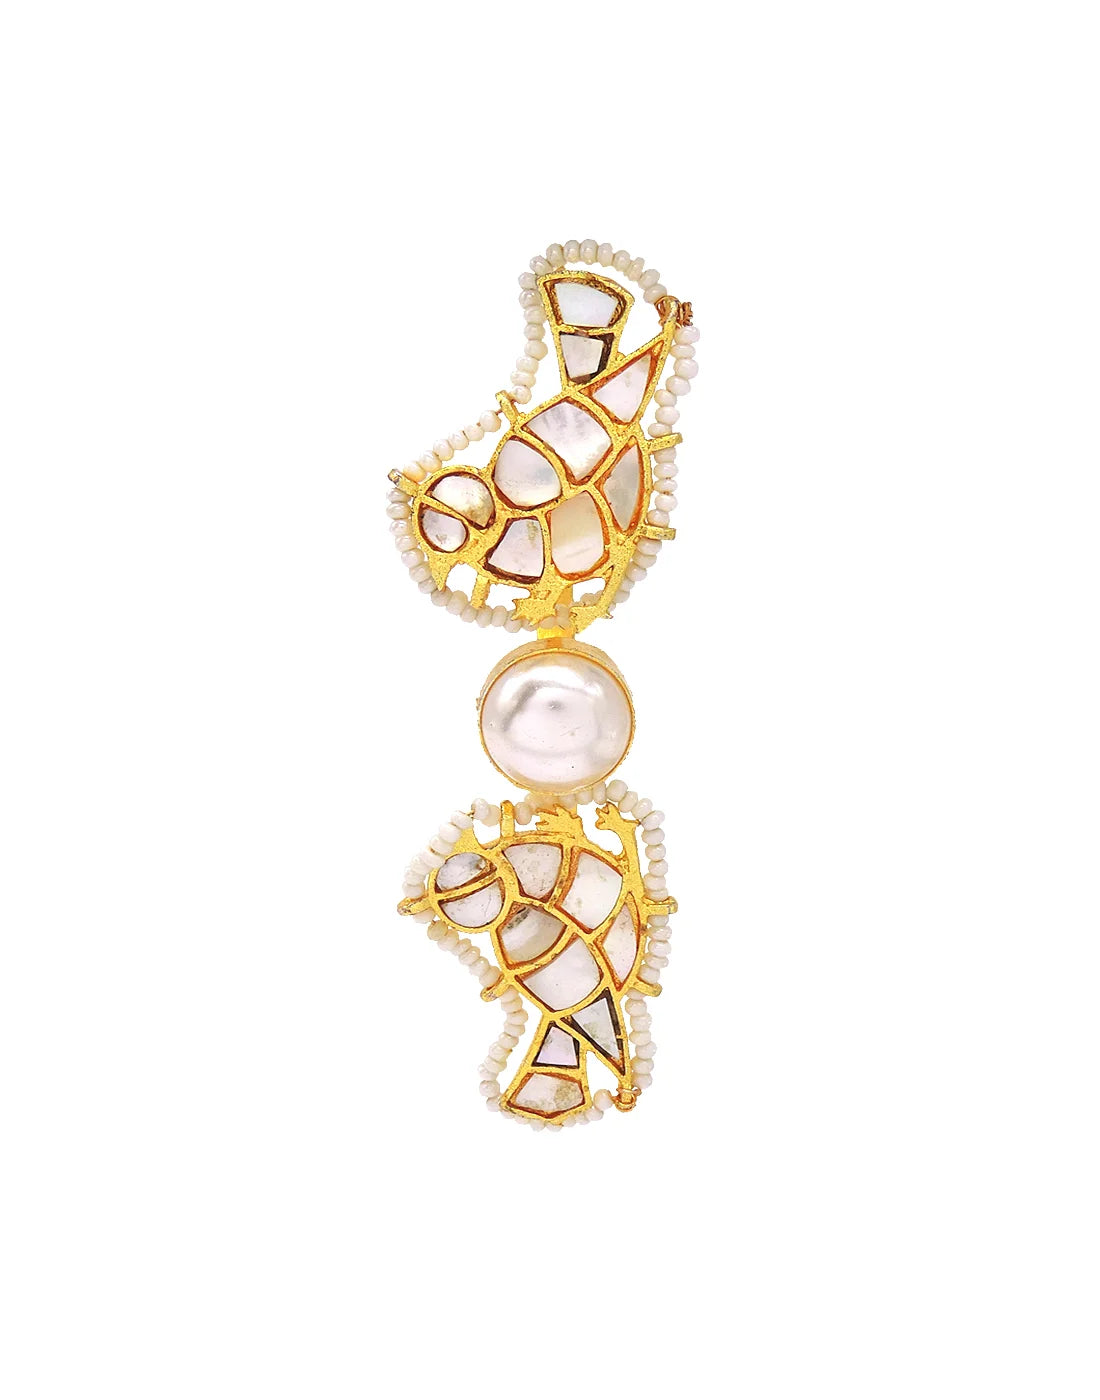 Pearl & Shell Ring- Handcrafted Jewellery from Dori